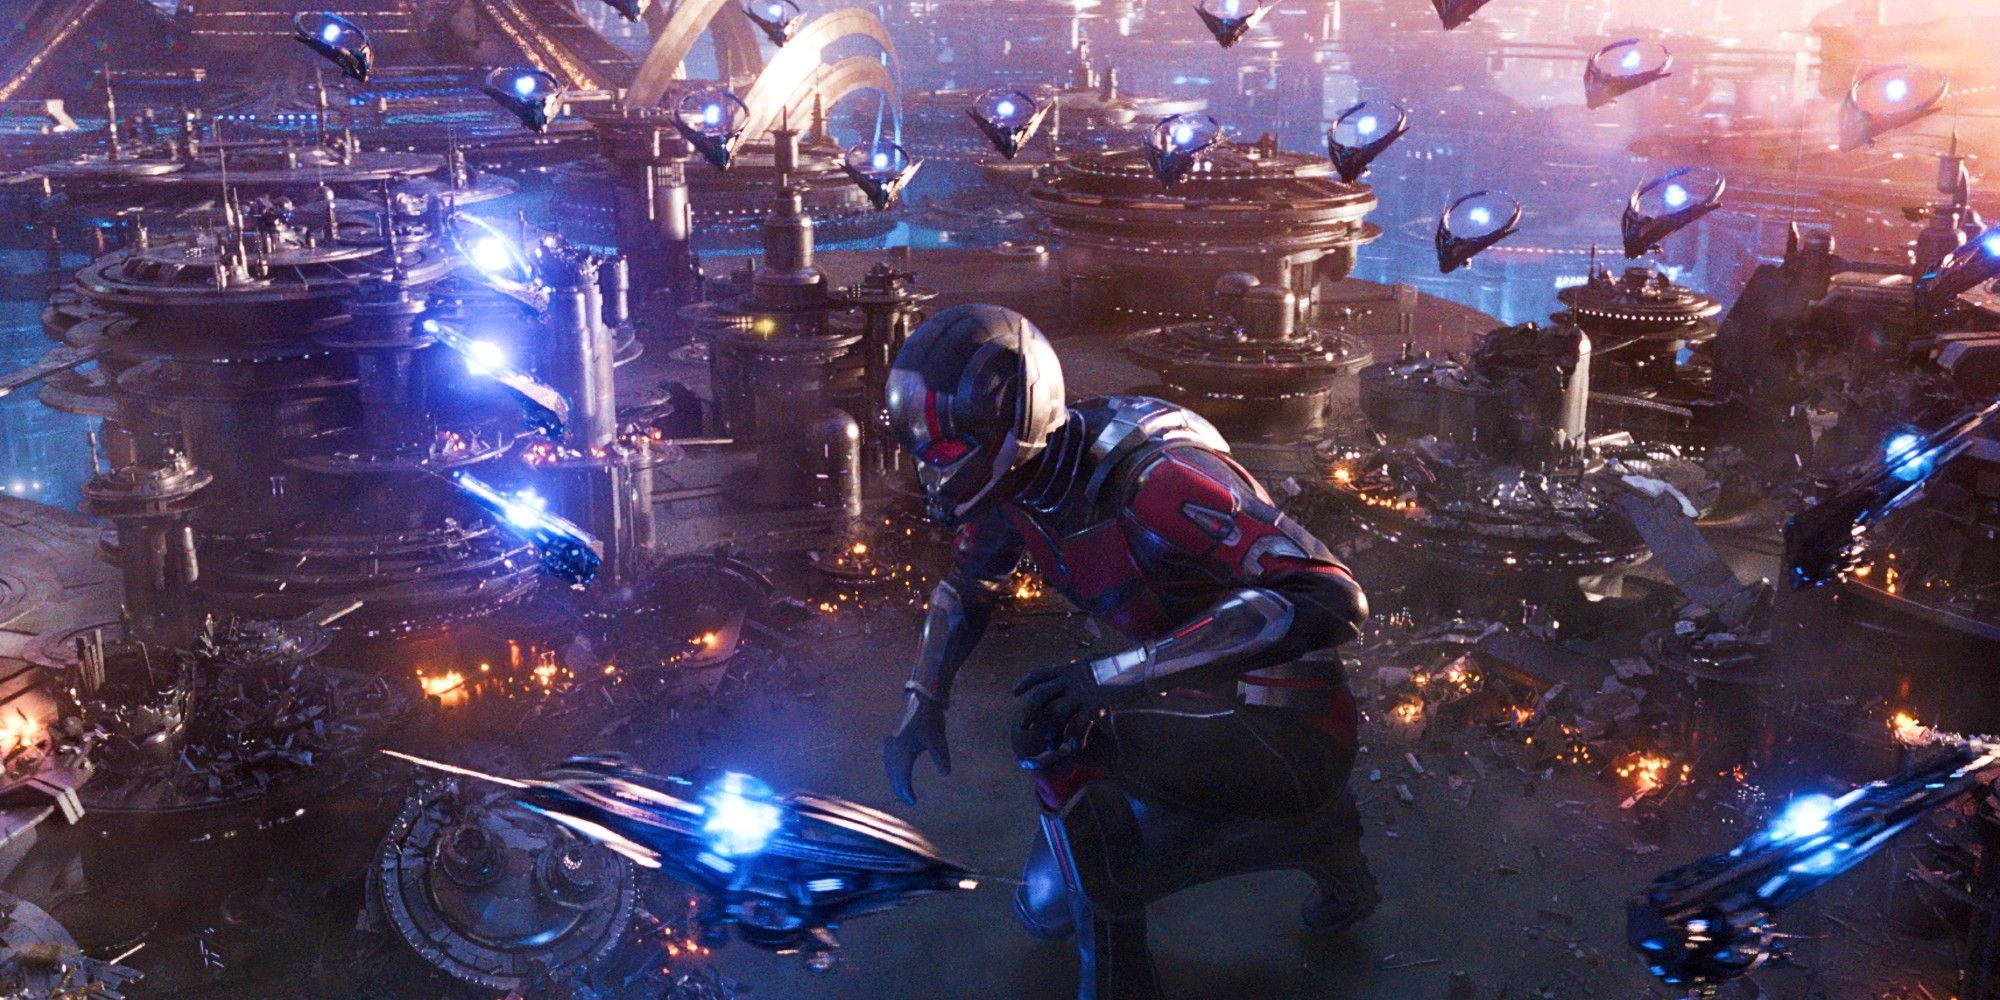 Marvel’s Latest Behind-The-Scenes VFX Issues Revealed: Ant-Man vs. Black Panther